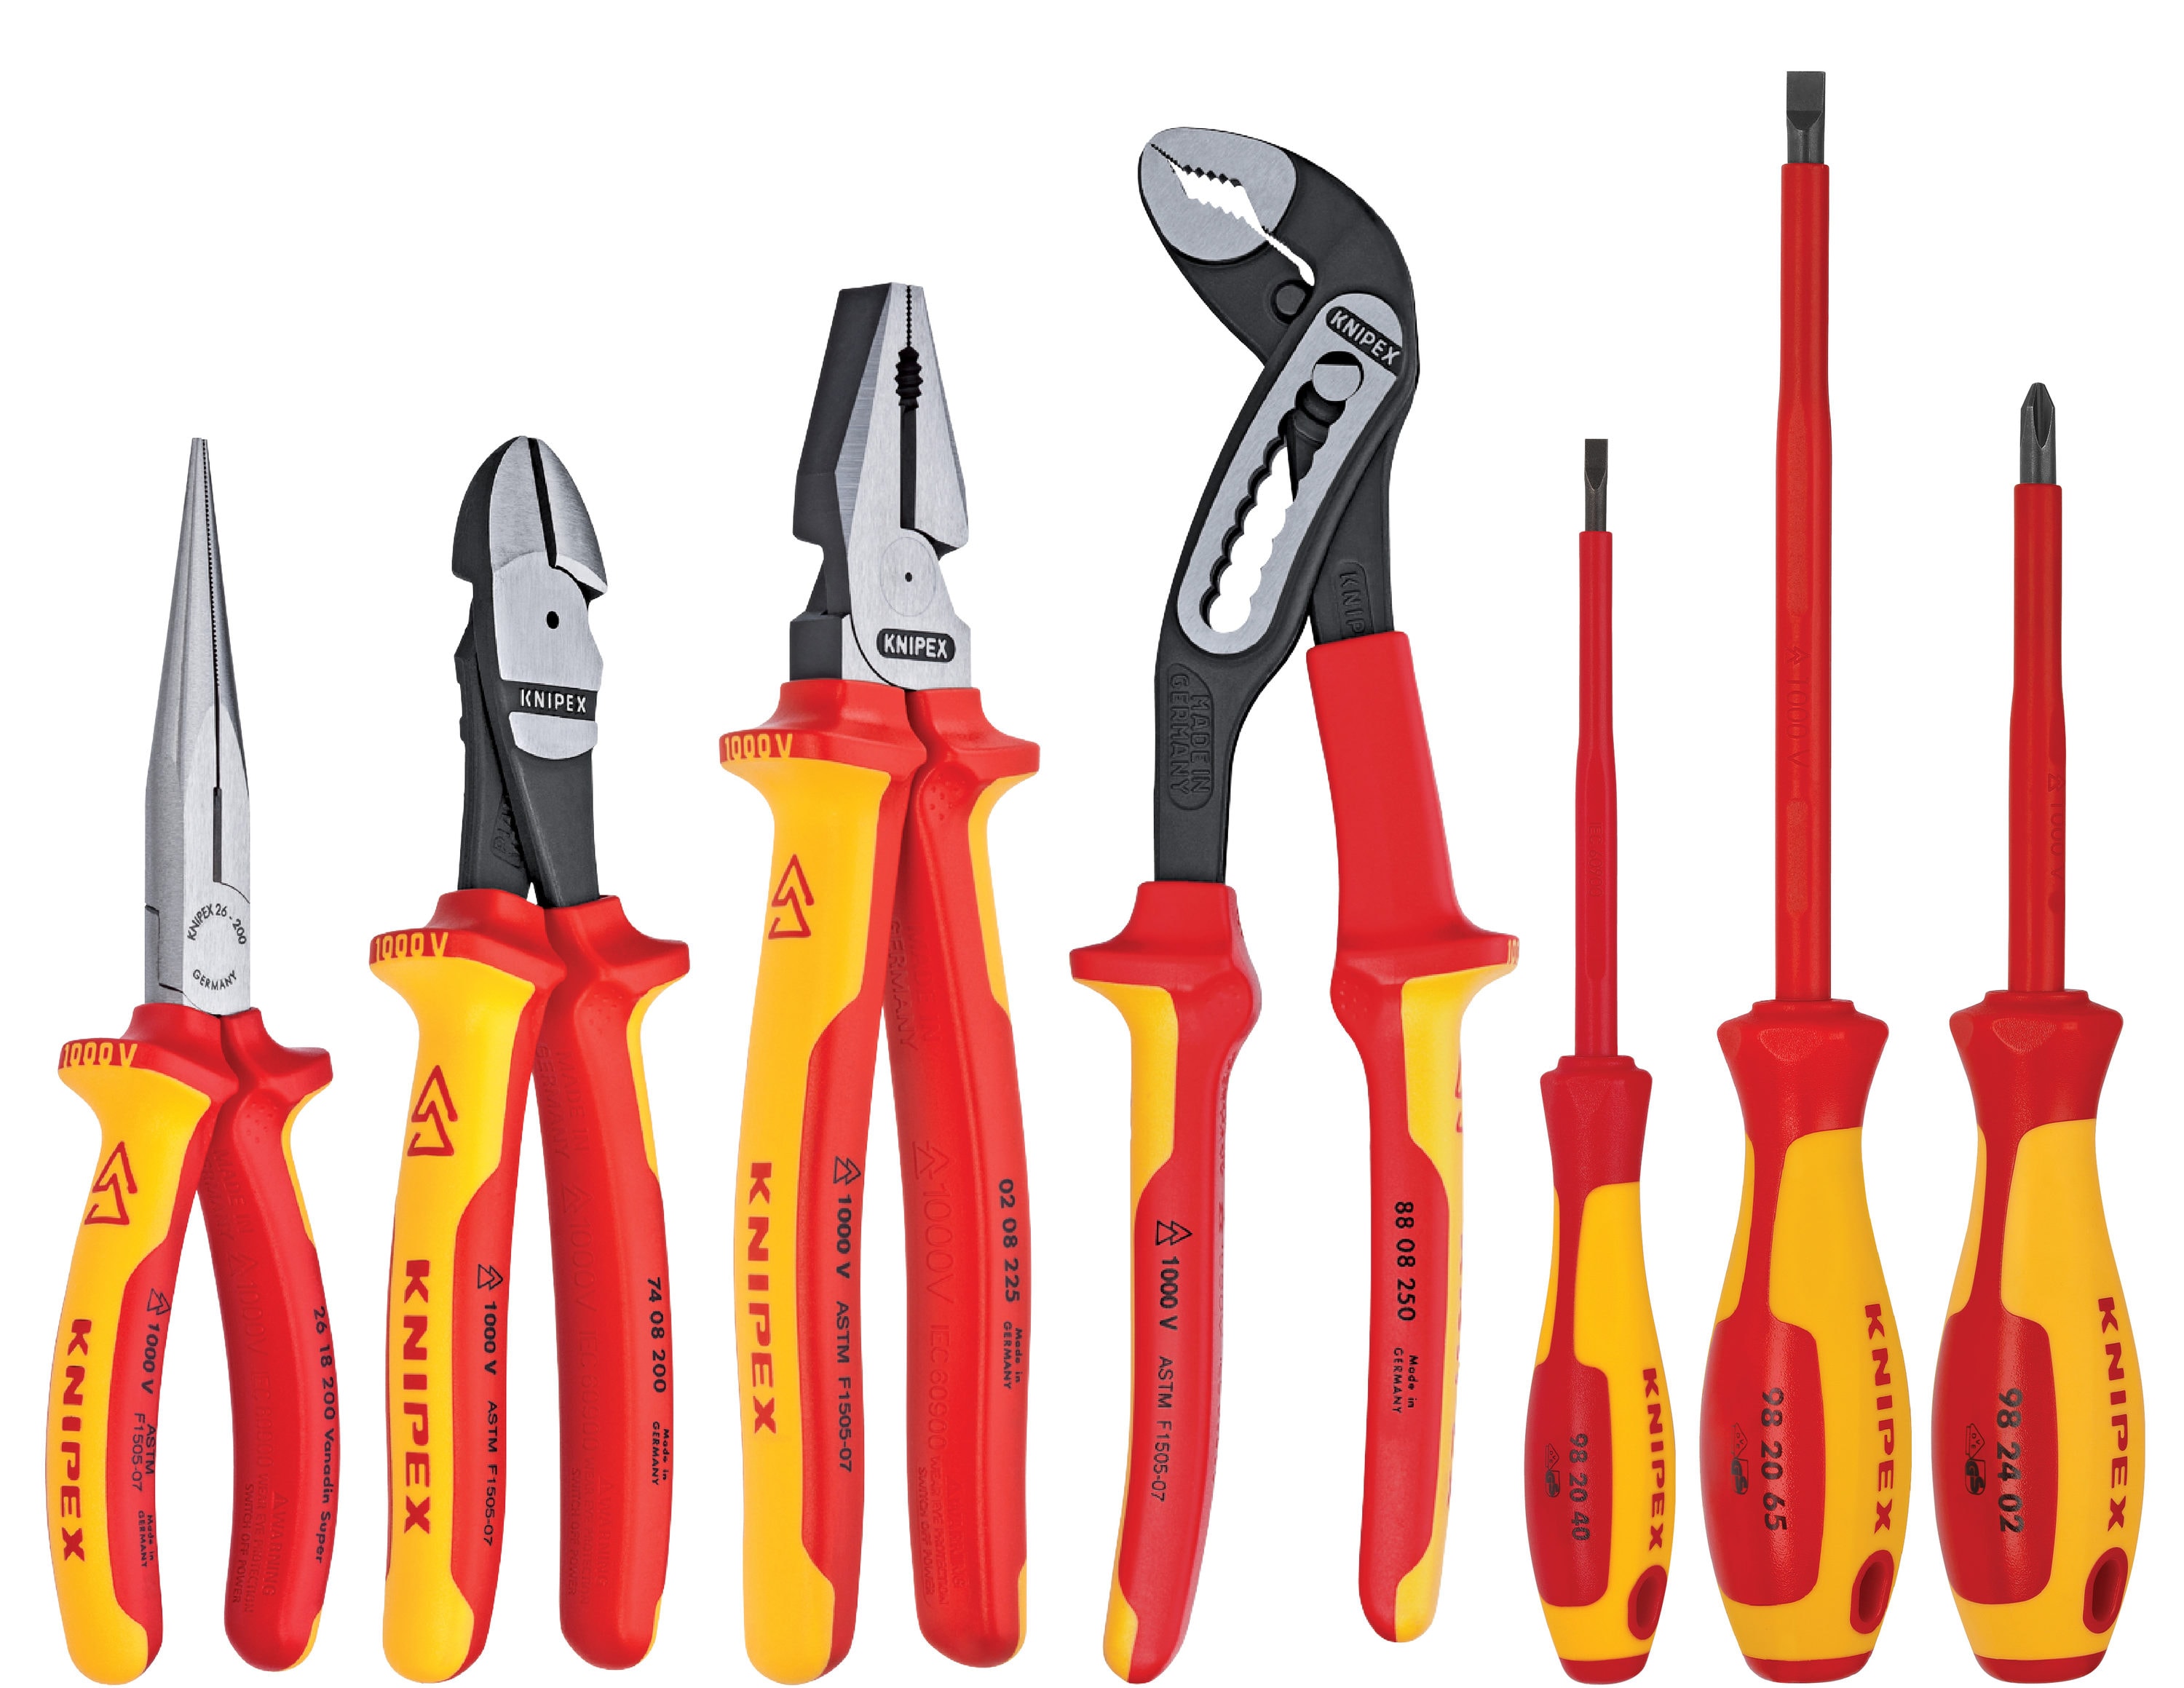 KNIPEX 4-Piece Circlip Snap-Ring Plier Set in Pouch - Automotive